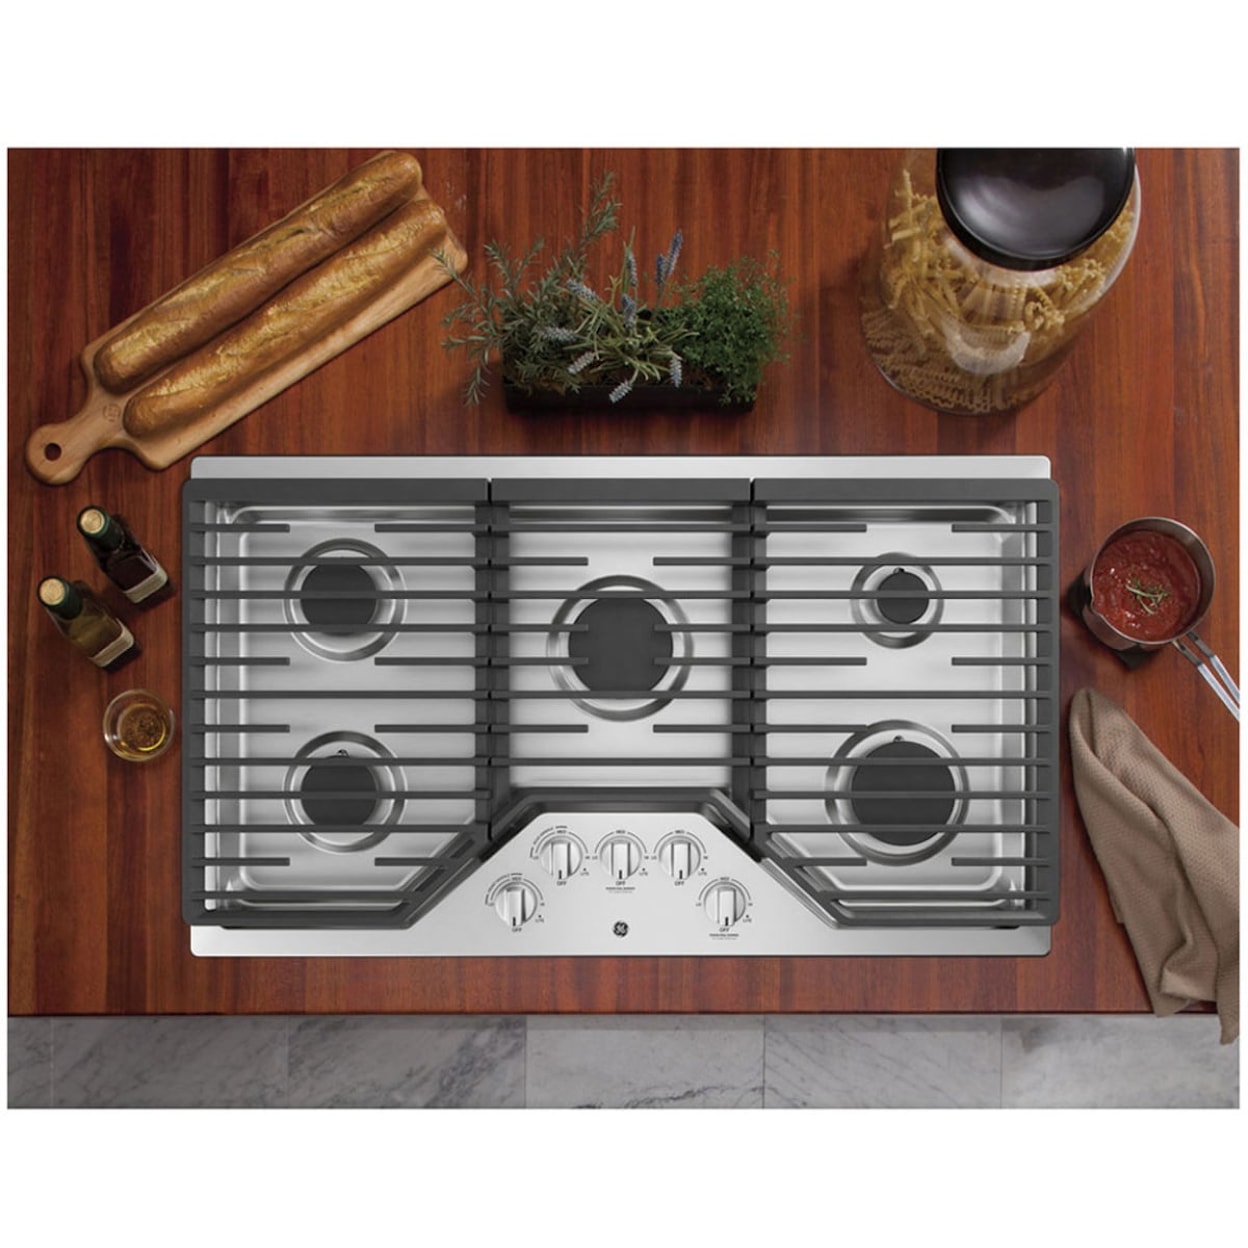 GE Appliances Cooktop Built-In Stainless Steel Gas Cooktop